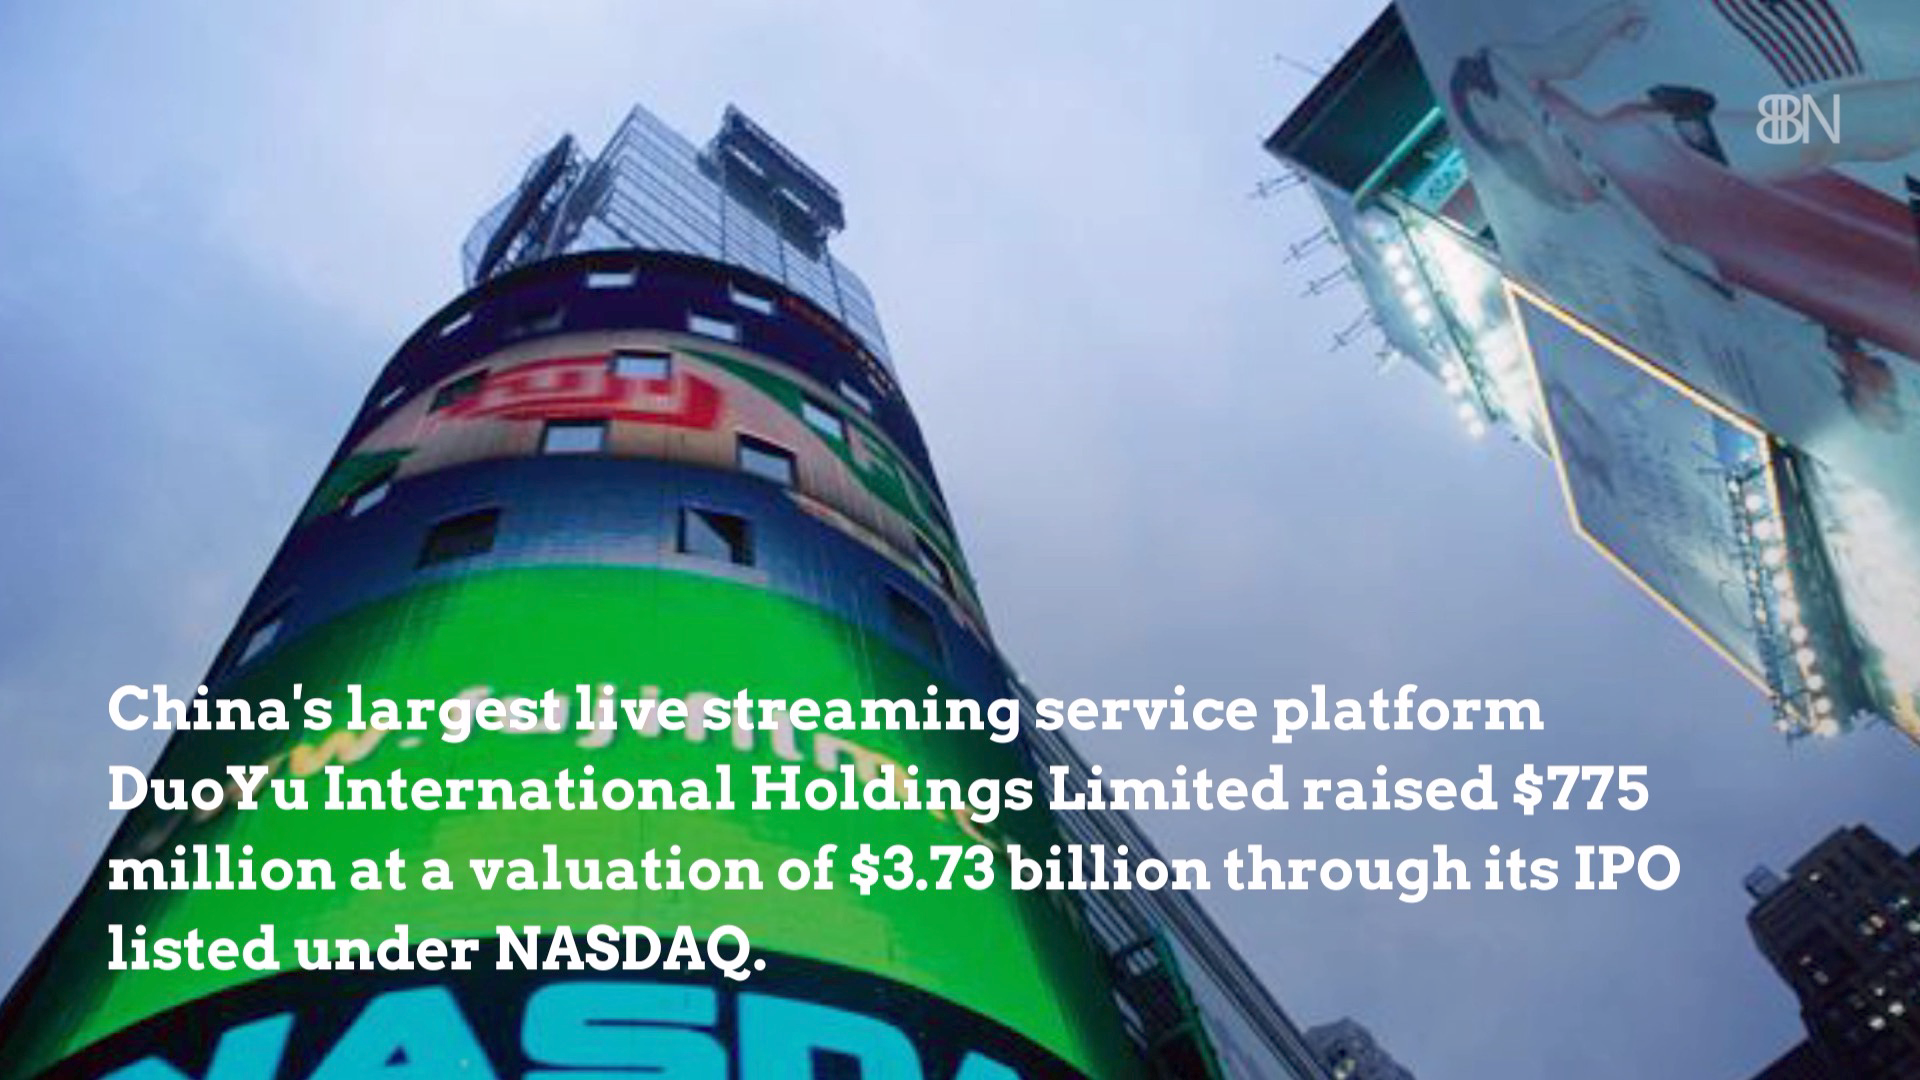 DuoYu Live Streaming Raised Hundreds Of Millions During IPO